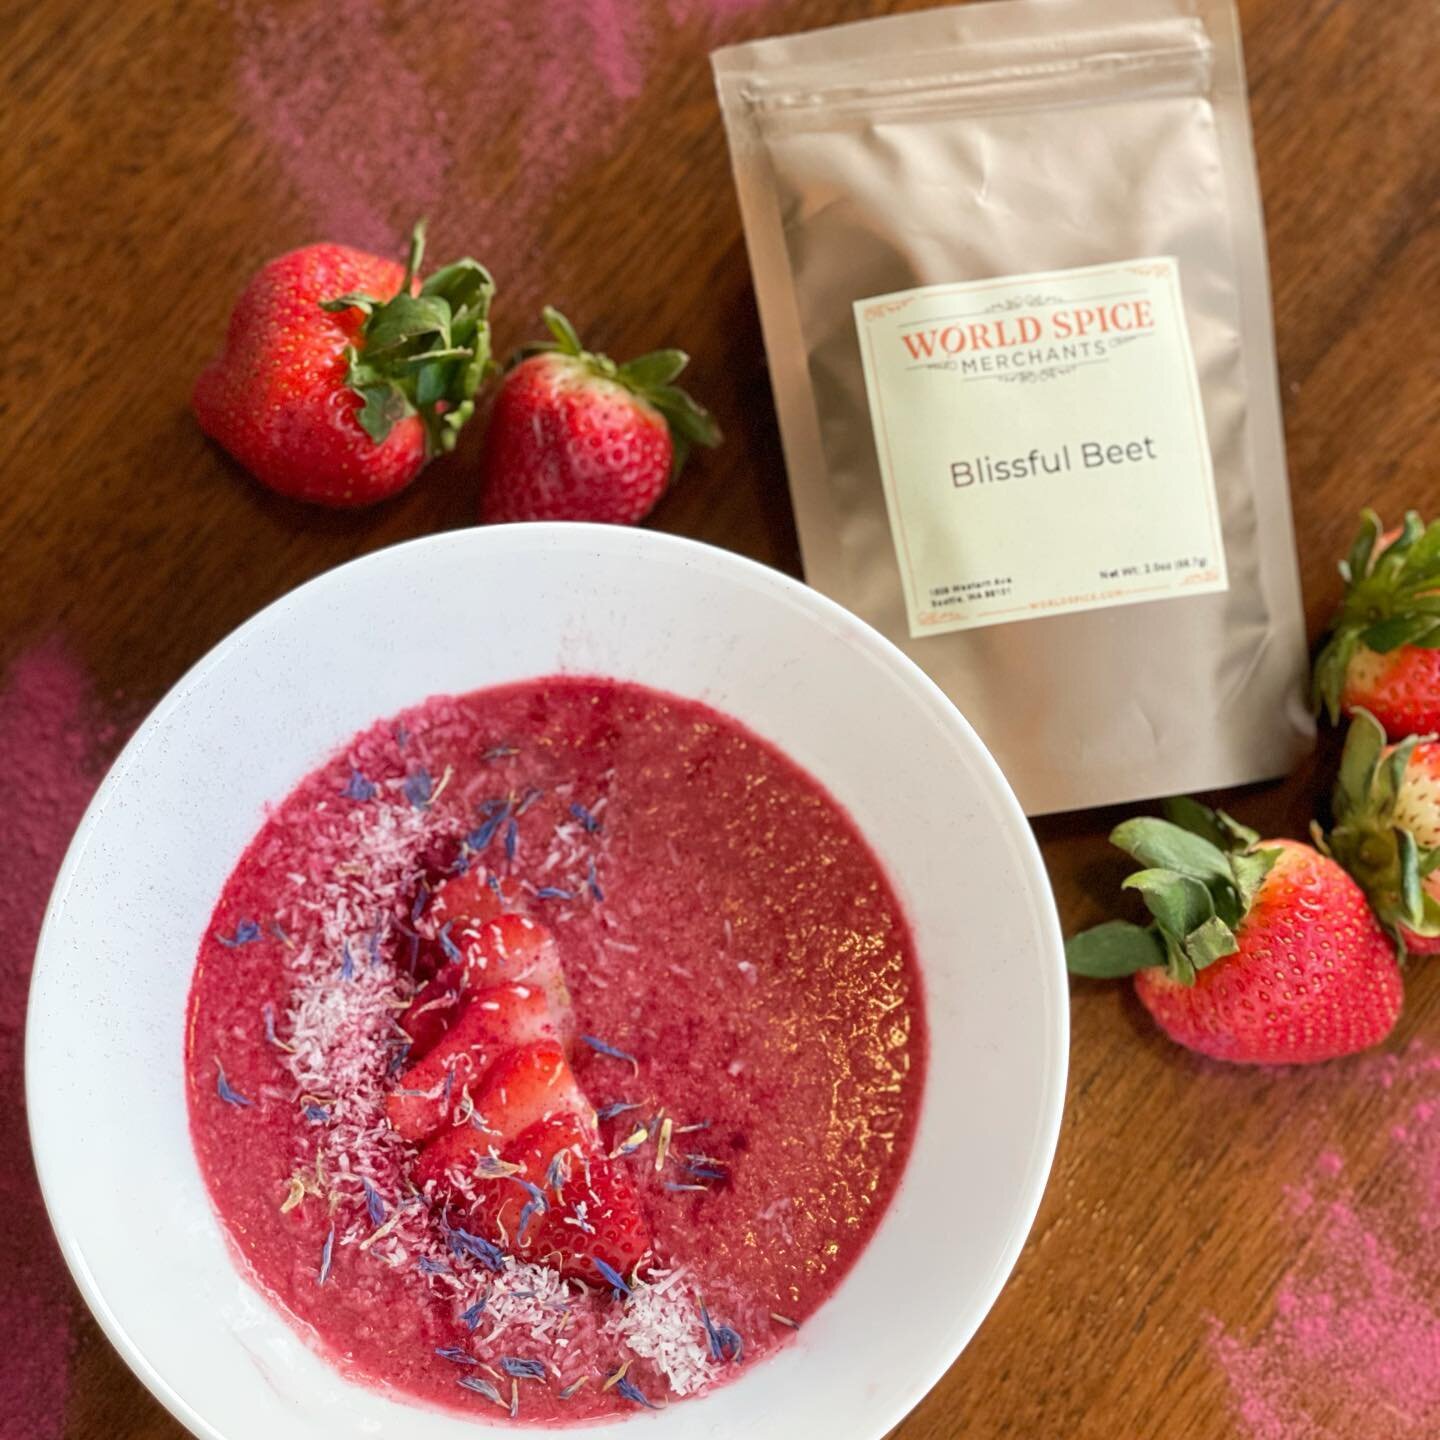 Good Morning!!! It&rsquo;s another sunny day here in Seattle and we&rsquo;re staring it off right...

Beautiful Beet Oatmeal with Strawberries 🍓🍓

This one is super simple... I just added 1/2 tsp Blissful Beet powder to my morning oatmeal... topped